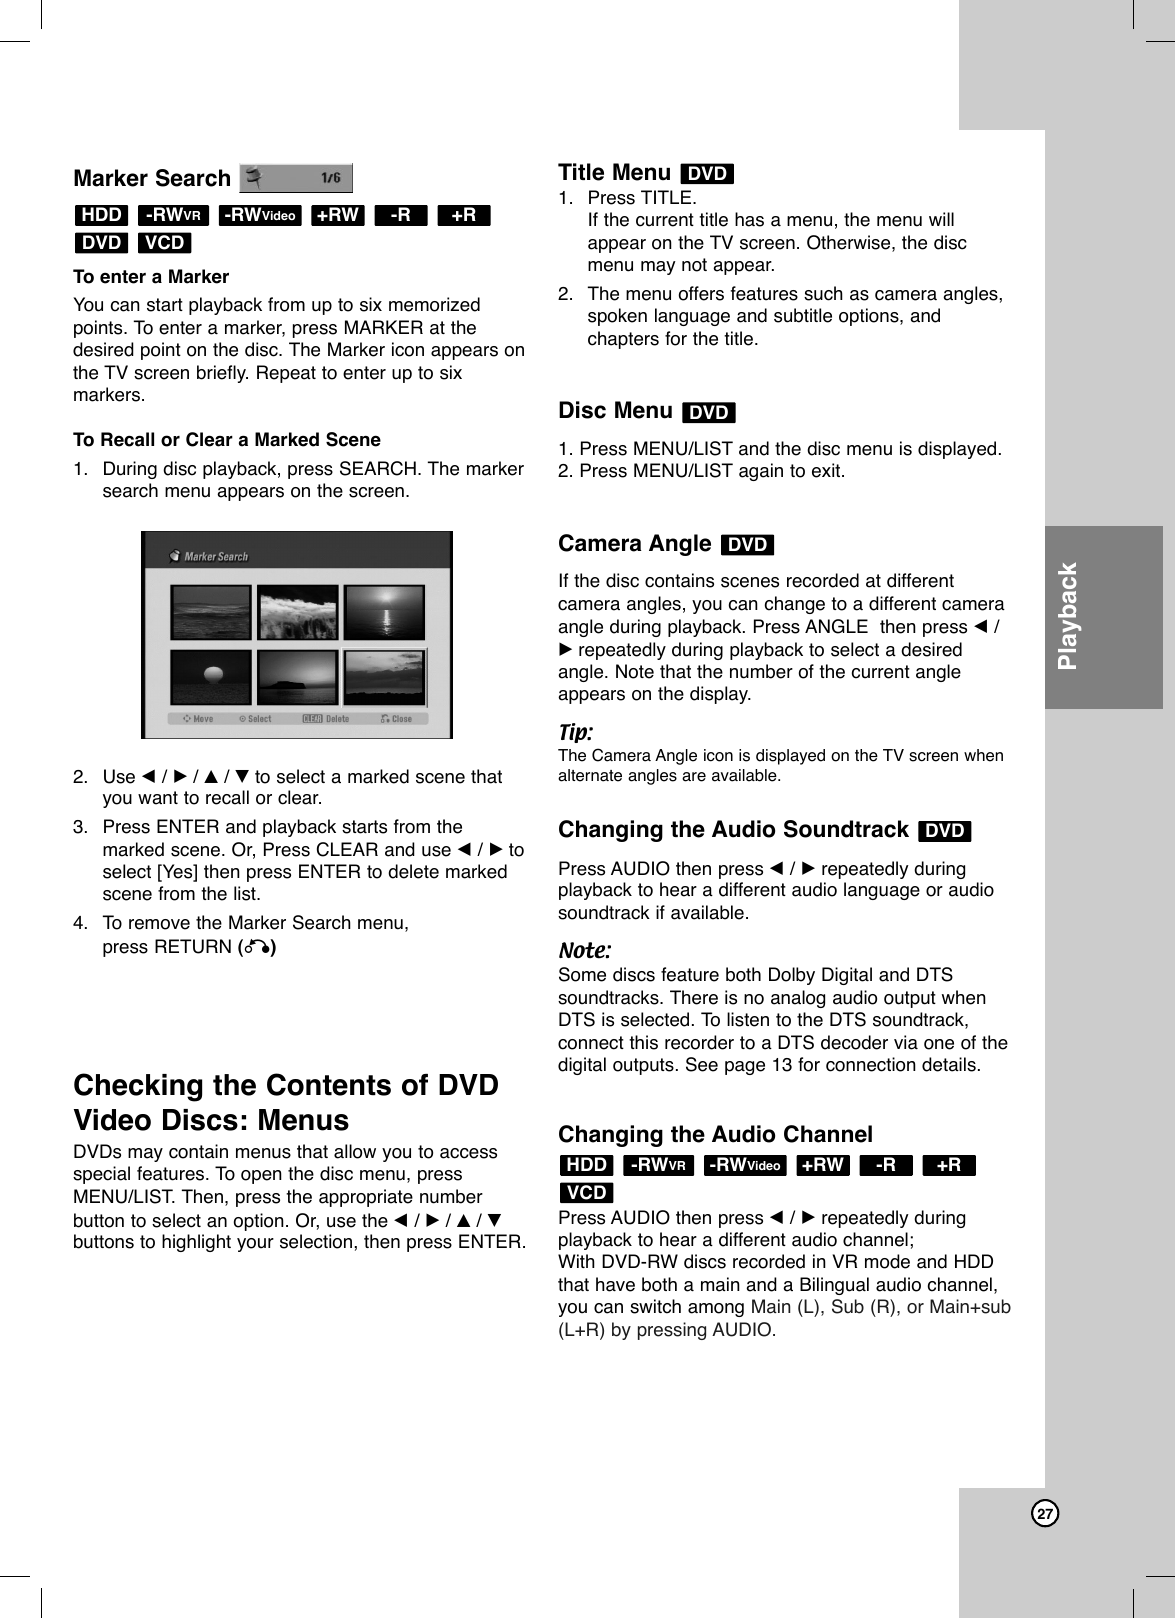 27PlaybackMarker SearchTo enter a Marker You can start playback from up to six memorizedpoints. To enter a marker, press MARKER at thedesired point on the disc. The Marker icon appears onthe TV screen briefly. Repeat to enter up to sixmarkers.To Recall or Clear a Marked Scene1. During disc playback, press SEARCH. The markersearch menu appears on the screen.2. Use b/ B/ v/ Vto select a marked scene thatyou want to recall or clear.3. Press ENTER and playback starts from themarked scene. Or, Press CLEAR and use b/ Btoselect [Yes] then press ENTER to delete markedscene from the list.4. To remove the Marker Search menu,press RETURN (O)Checking the Contents of DVDVideo Discs: MenusDVDs may contain menus that allow you to access special features. To open the disc menu, pressMENU/LIST. Then, press the appropriate numberbutton to select an option. Or, use the b/ B/ v/ Vbuttons to highlight your selection, then press ENTER.Title Menu 1. Press TITLE.If the current title has a menu, the menu willappear on the TV screen. Otherwise, the discmenu may not appear.2. The menu offers features such as camera angles,spoken language and subtitle options, andchapters for the title.Disc Menu 1. Press MENU/LIST and the disc menu is displayed.2. Press MENU/LIST again to exit.Camera Angle If the disc contains scenes recorded at differentcamera angles, you can change to a different cameraangle during playback. Press ANGLE  then press b/Brepeatedly during playback to select a desiredangle. Note that the number of the current angleappears on the display.Tip:The Camera Angle icon is displayed on the TV screen whenalternate angles are available.Changing the Audio Soundtrack Press AUDIO then press b/ Brepeatedly duringplayback to hear a different audio language or audiosoundtrack if available.Note:Some discs feature both Dolby Digital and DTSsoundtracks. There is no analog audio output whenDTS is selected. To listen to the DTS soundtrack,connect this recorder to a DTS decoder via one of thedigital outputs. See page 13 for connection details.Changing the Audio ChannelPress AUDIO then press b/ Brepeatedly duringplayback to hear a different audio channel;With DVD-RW discs recorded in VR mode and HDDthat have both a main and a Bilingual audio channel,you can switch among Main (L), Sub (R), or Main+sub(L+R) by pressing AUDIO.VCD+R-R+RW-RWVideo-RWVRHDDDVDDVDDVDDVDVCDDVD+R-R+RW-RWVideo-RWVRHDD